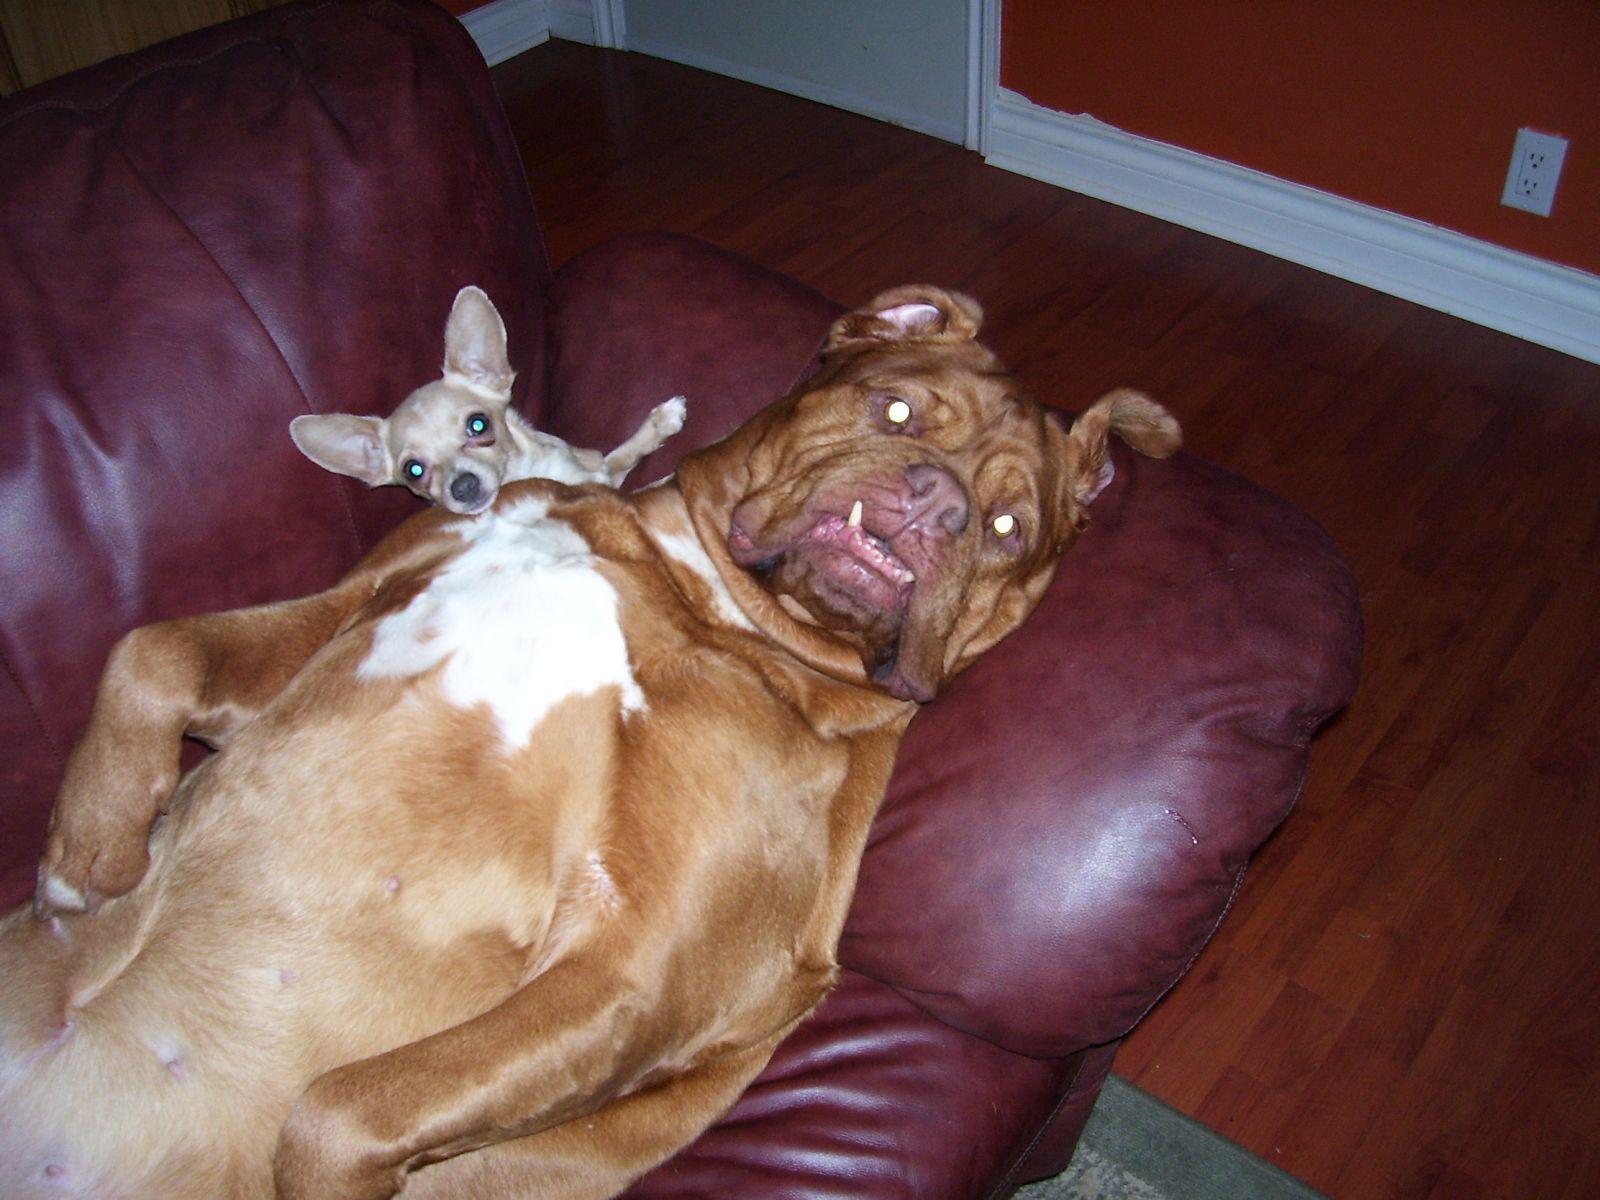 Ugly Dogs Picture, Weird Pics, Amazing and Strange Image